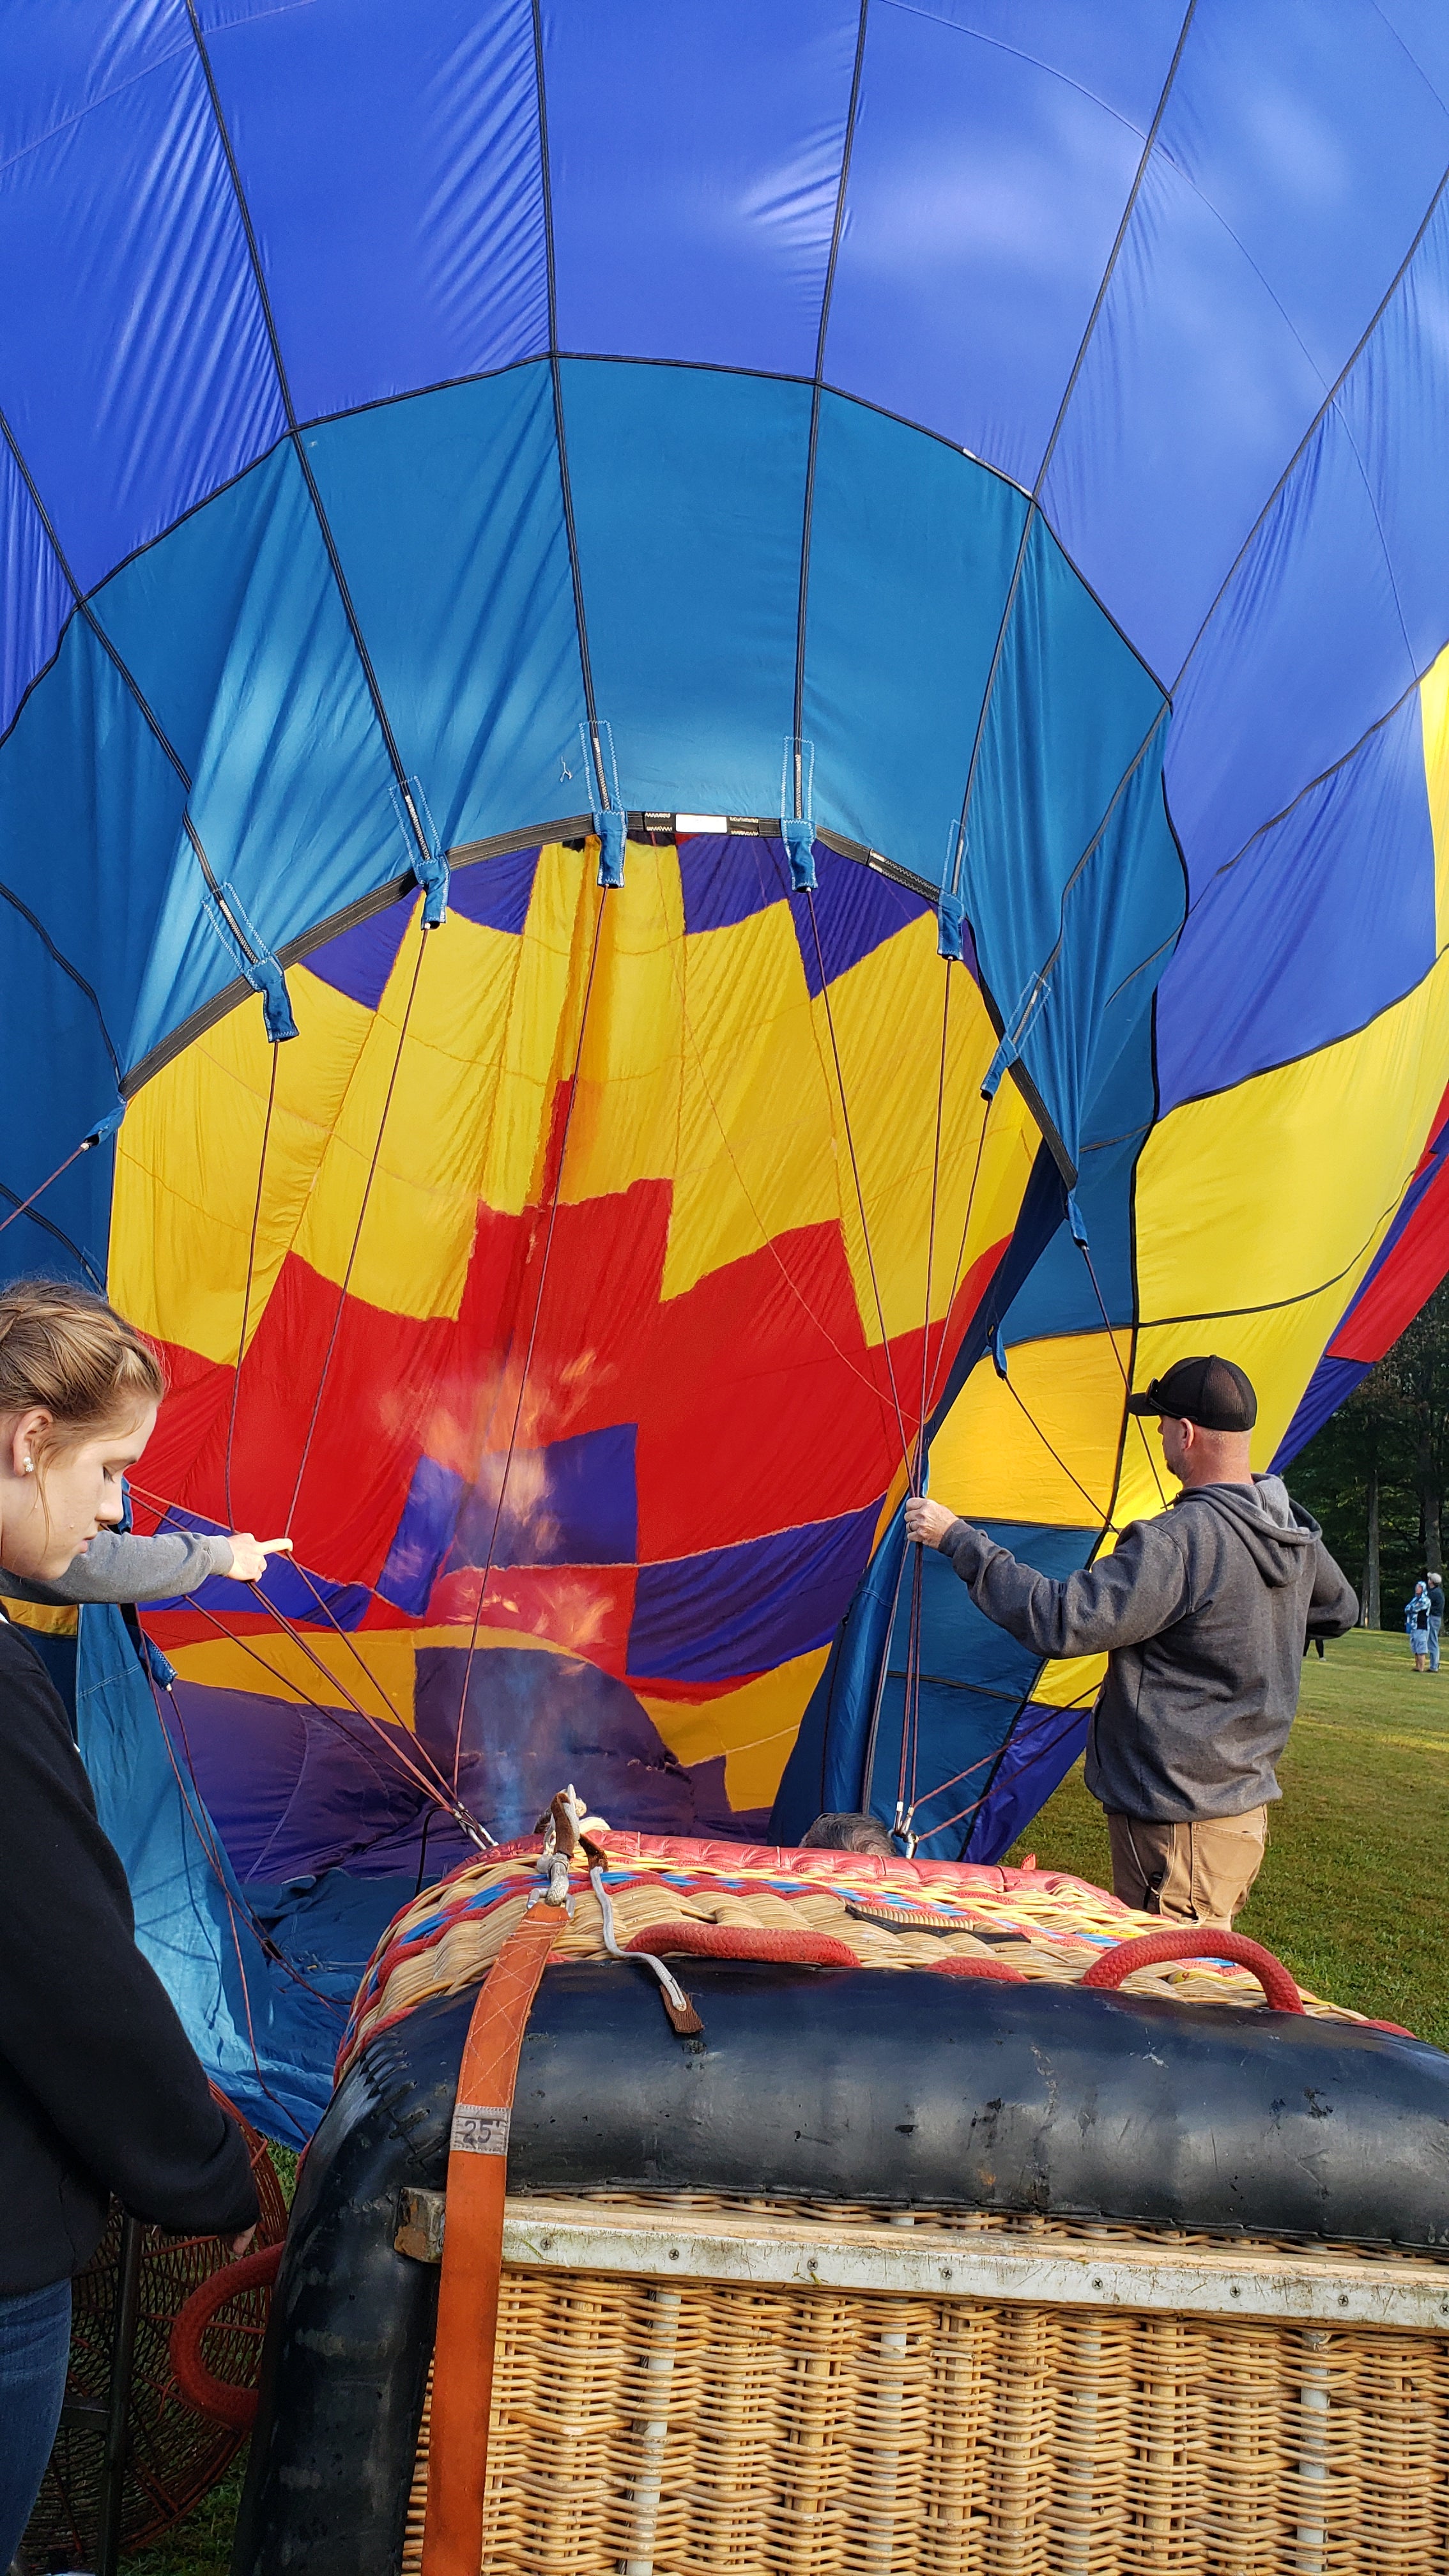 Suncook Valley Rotary Club Balloon Festival is nearby in early Augus